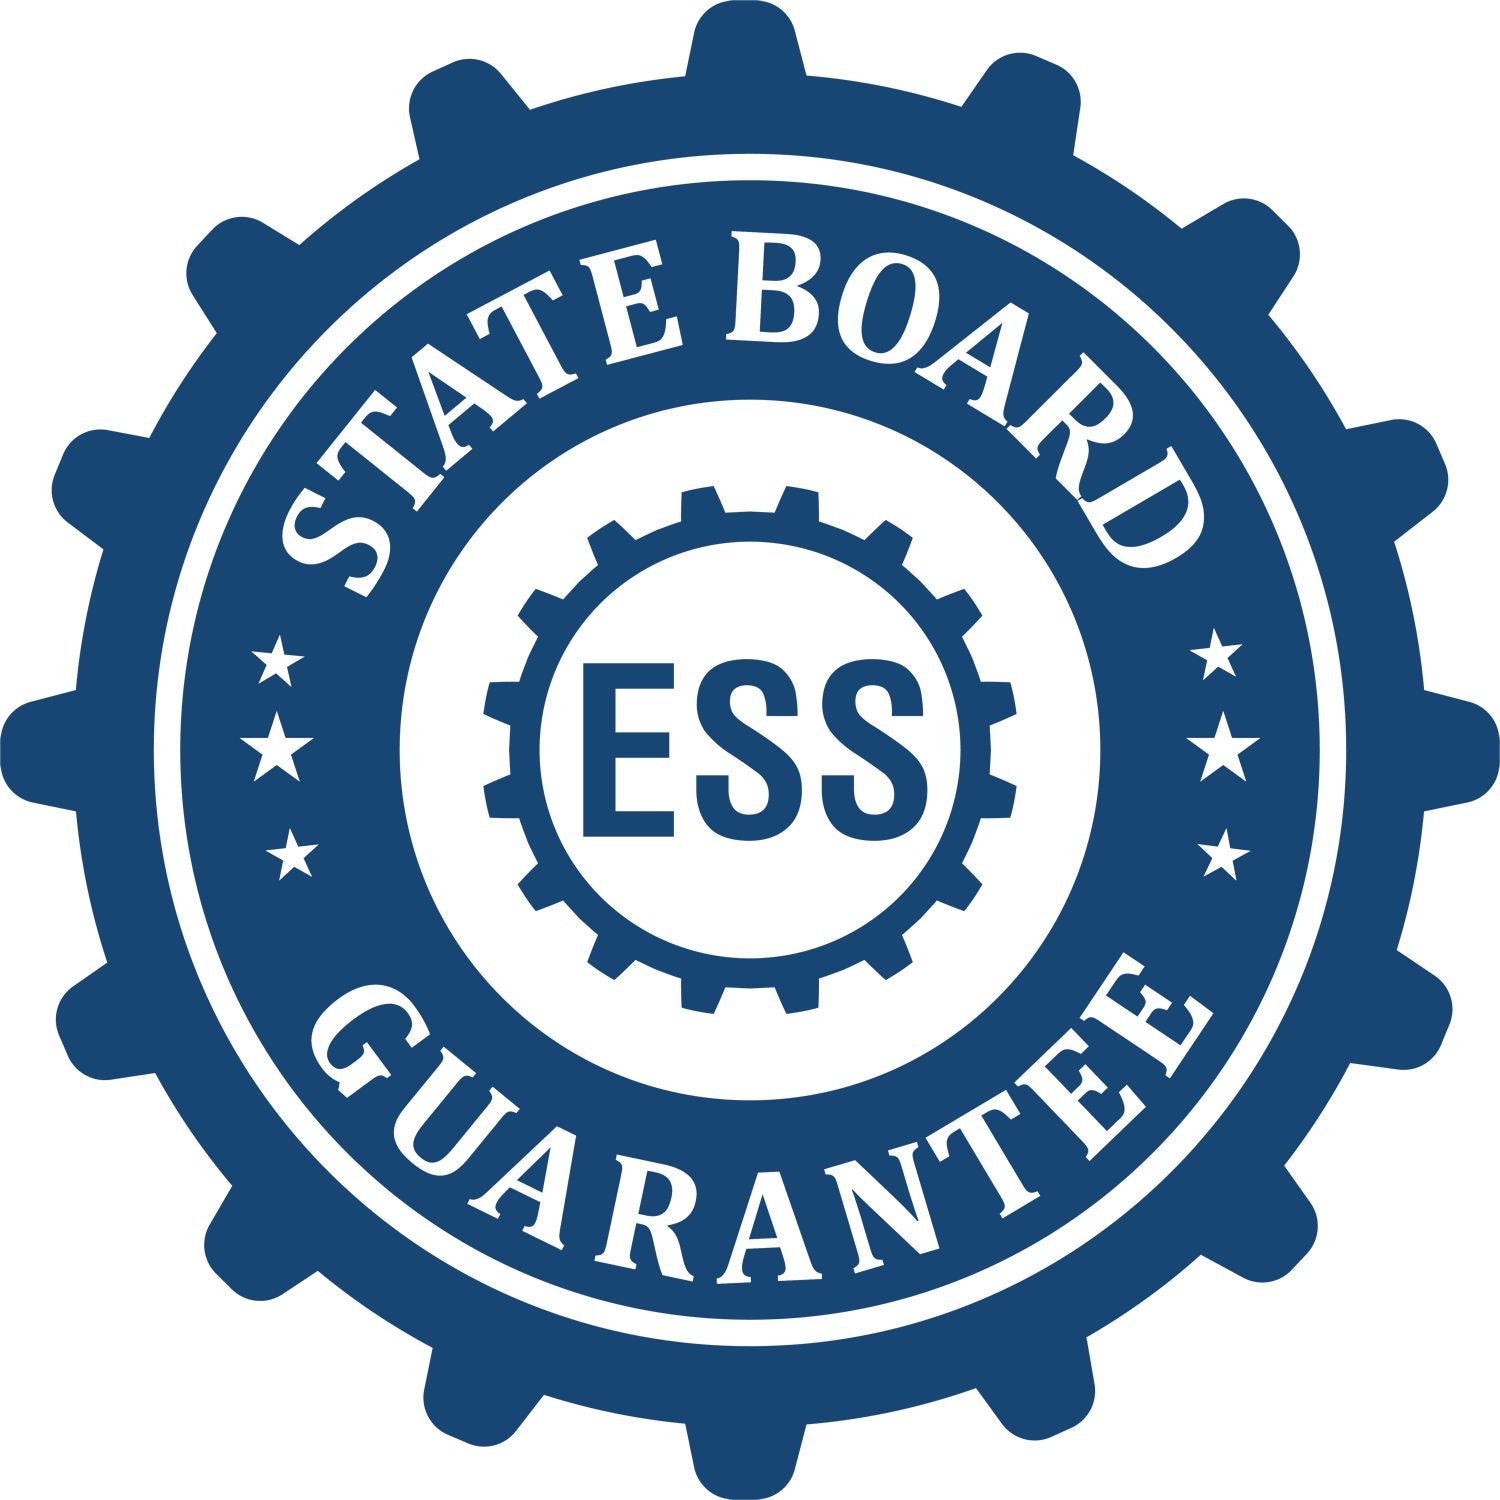 An emblem in a gear shape illustrating a state board guarantee for the State of North Carolina Long Reach Architectural Embossing Seal product.